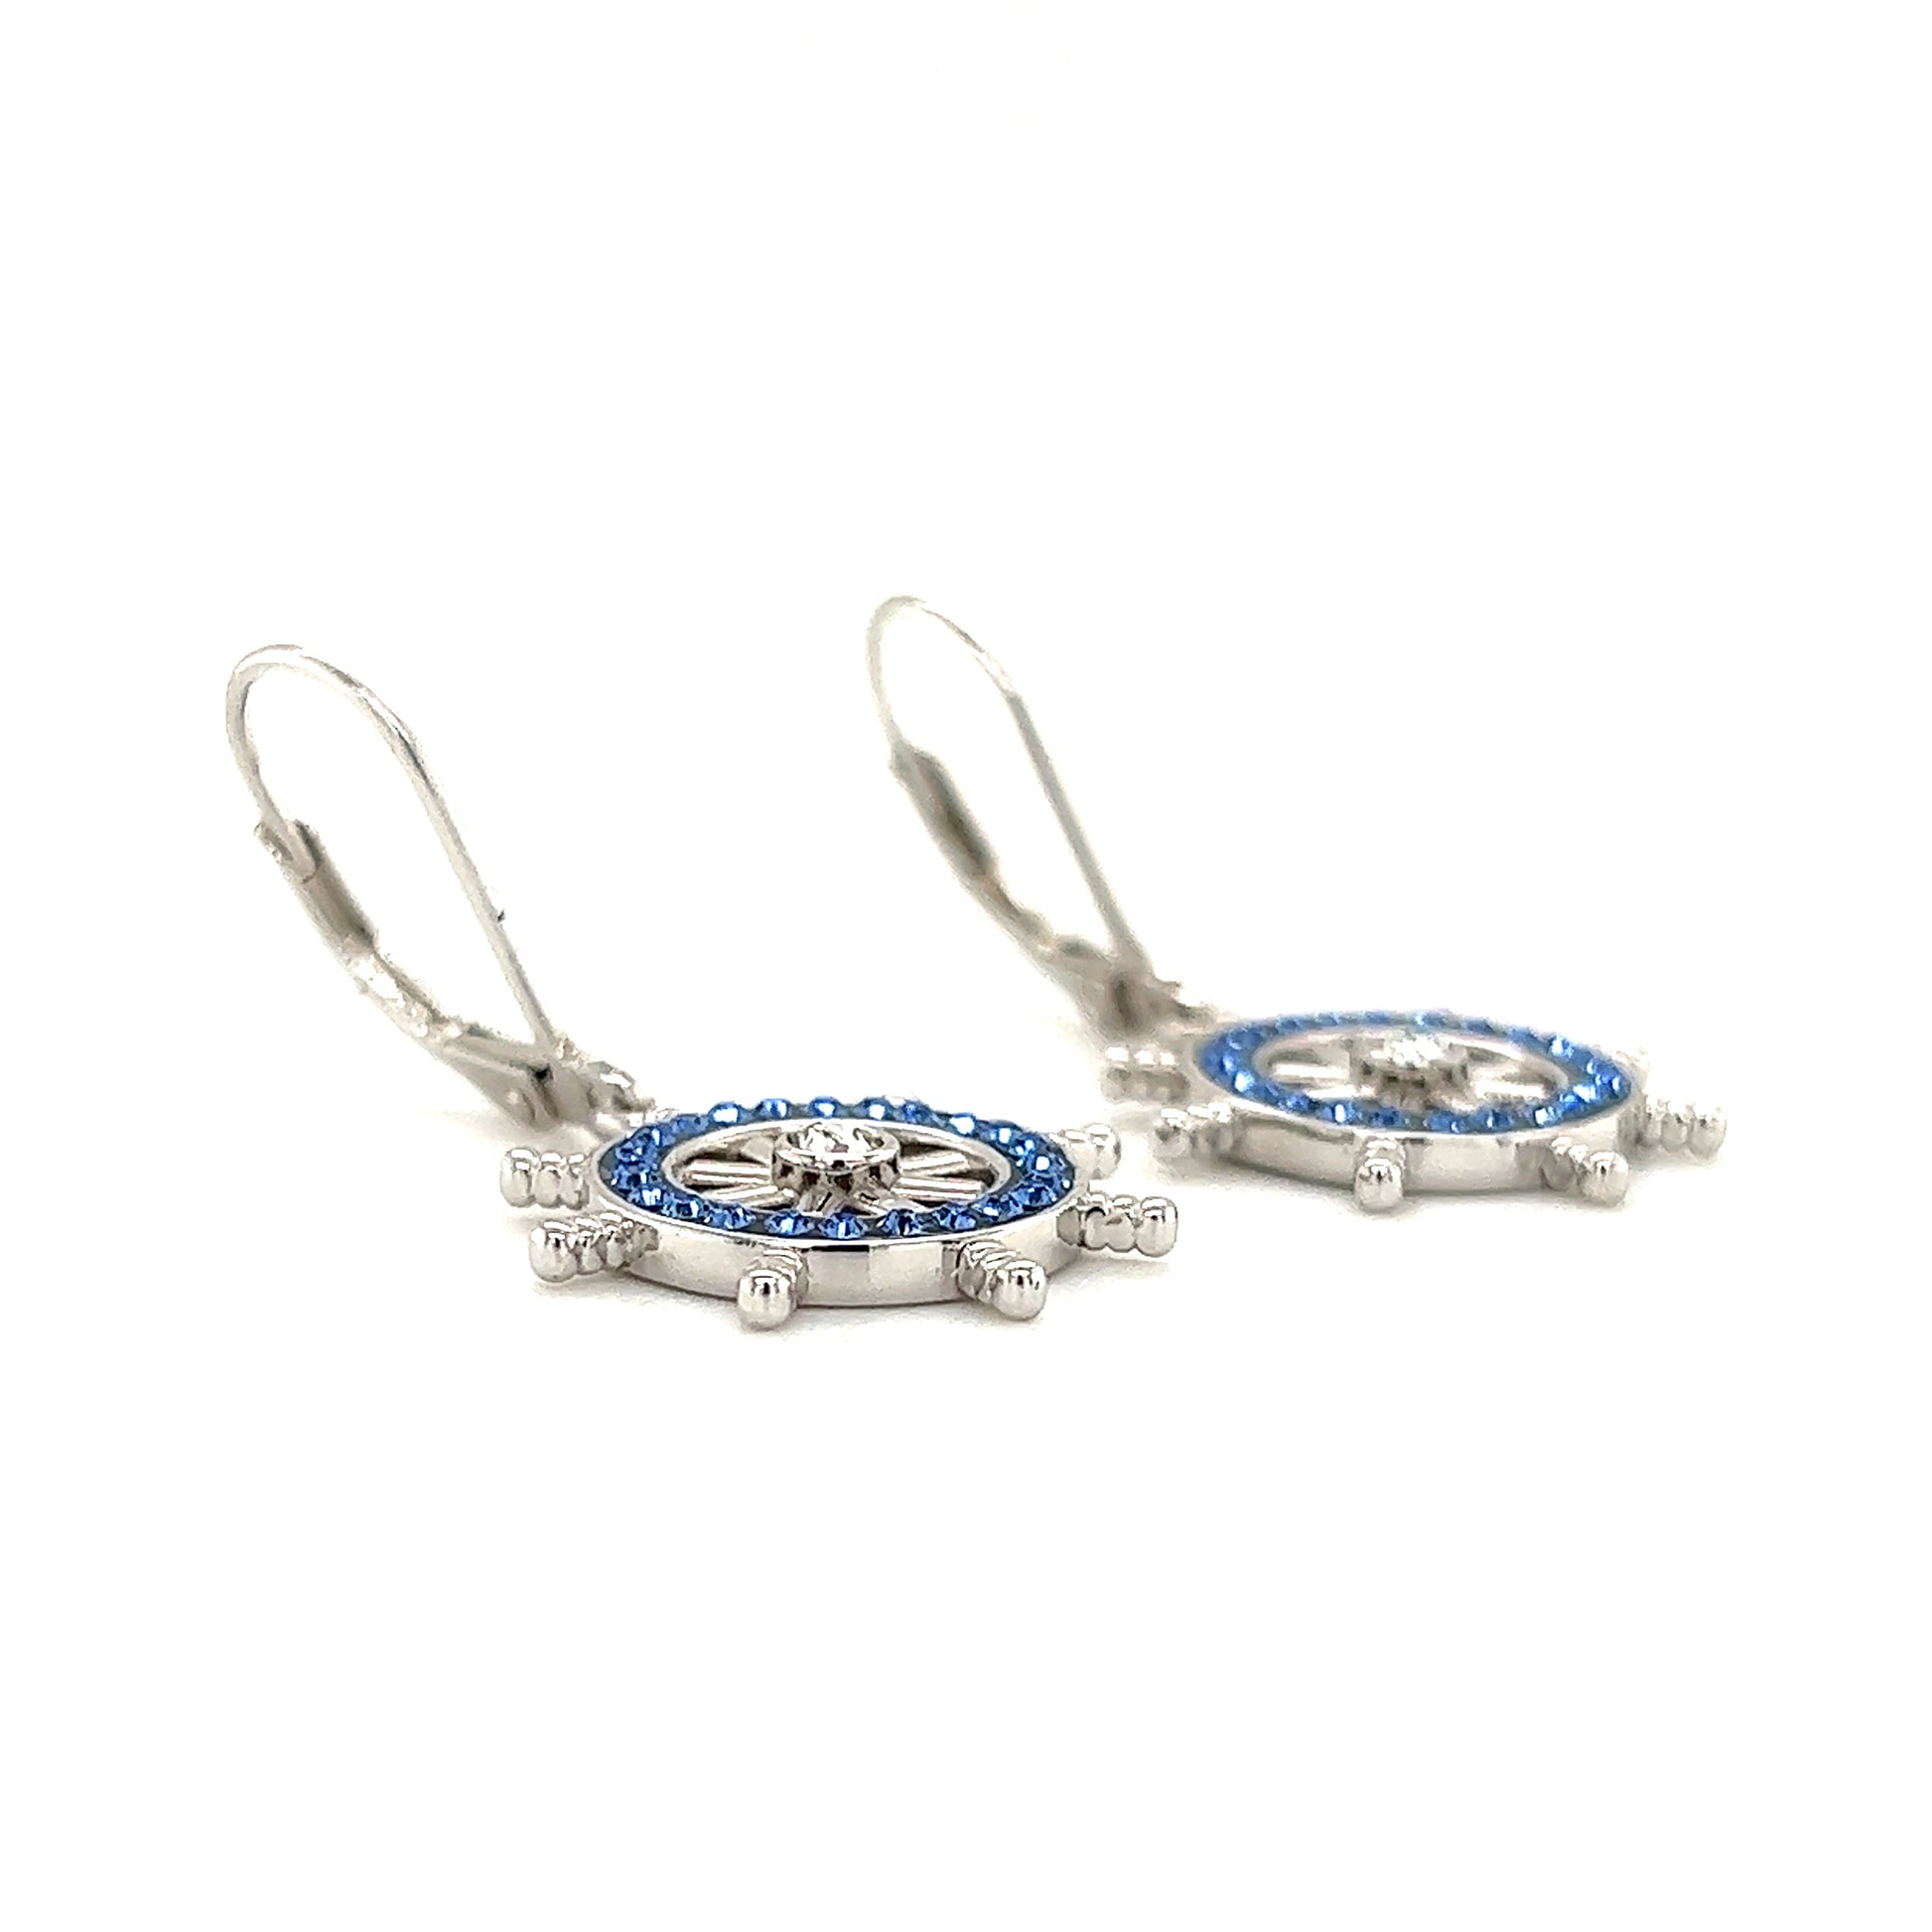 Ship's Wheel Dangle Earrings with Crystals in Sterling Silver Left Side View